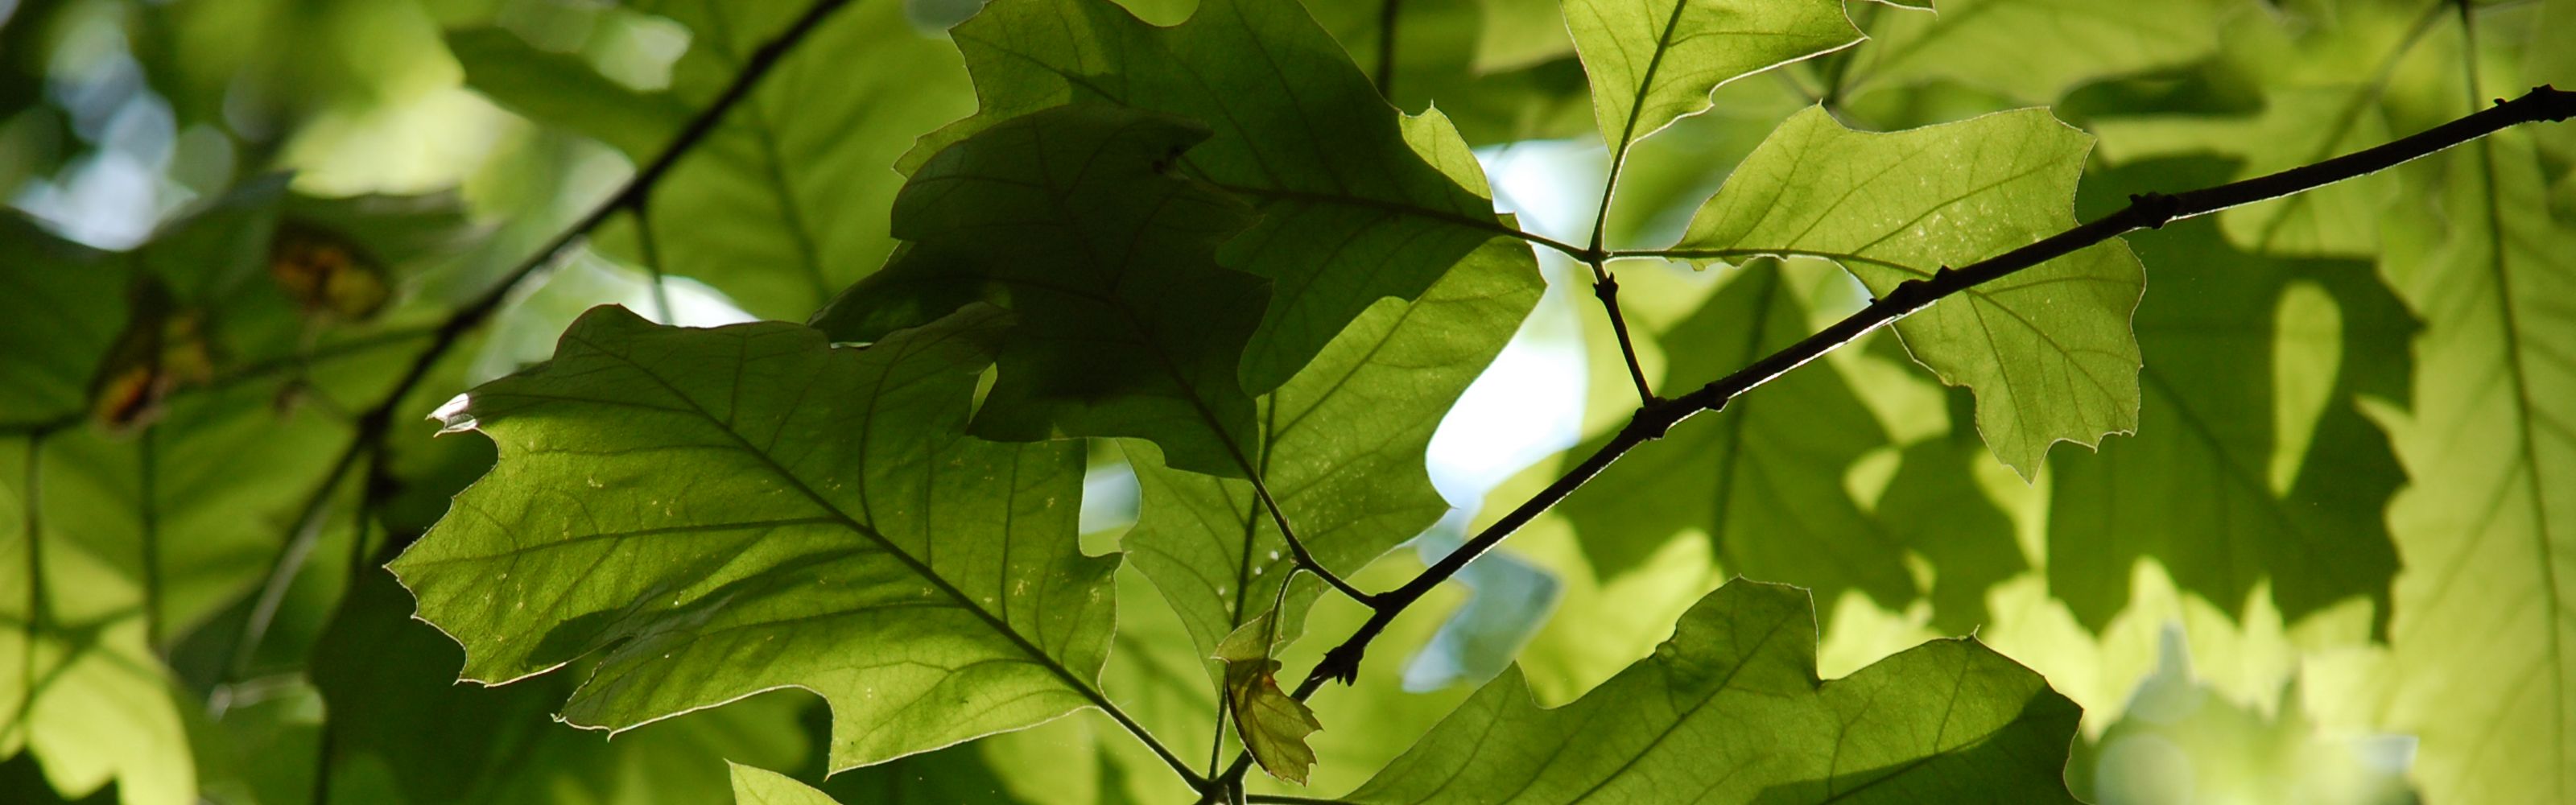 a close up of leaves on a tree, back-lit by the sun.